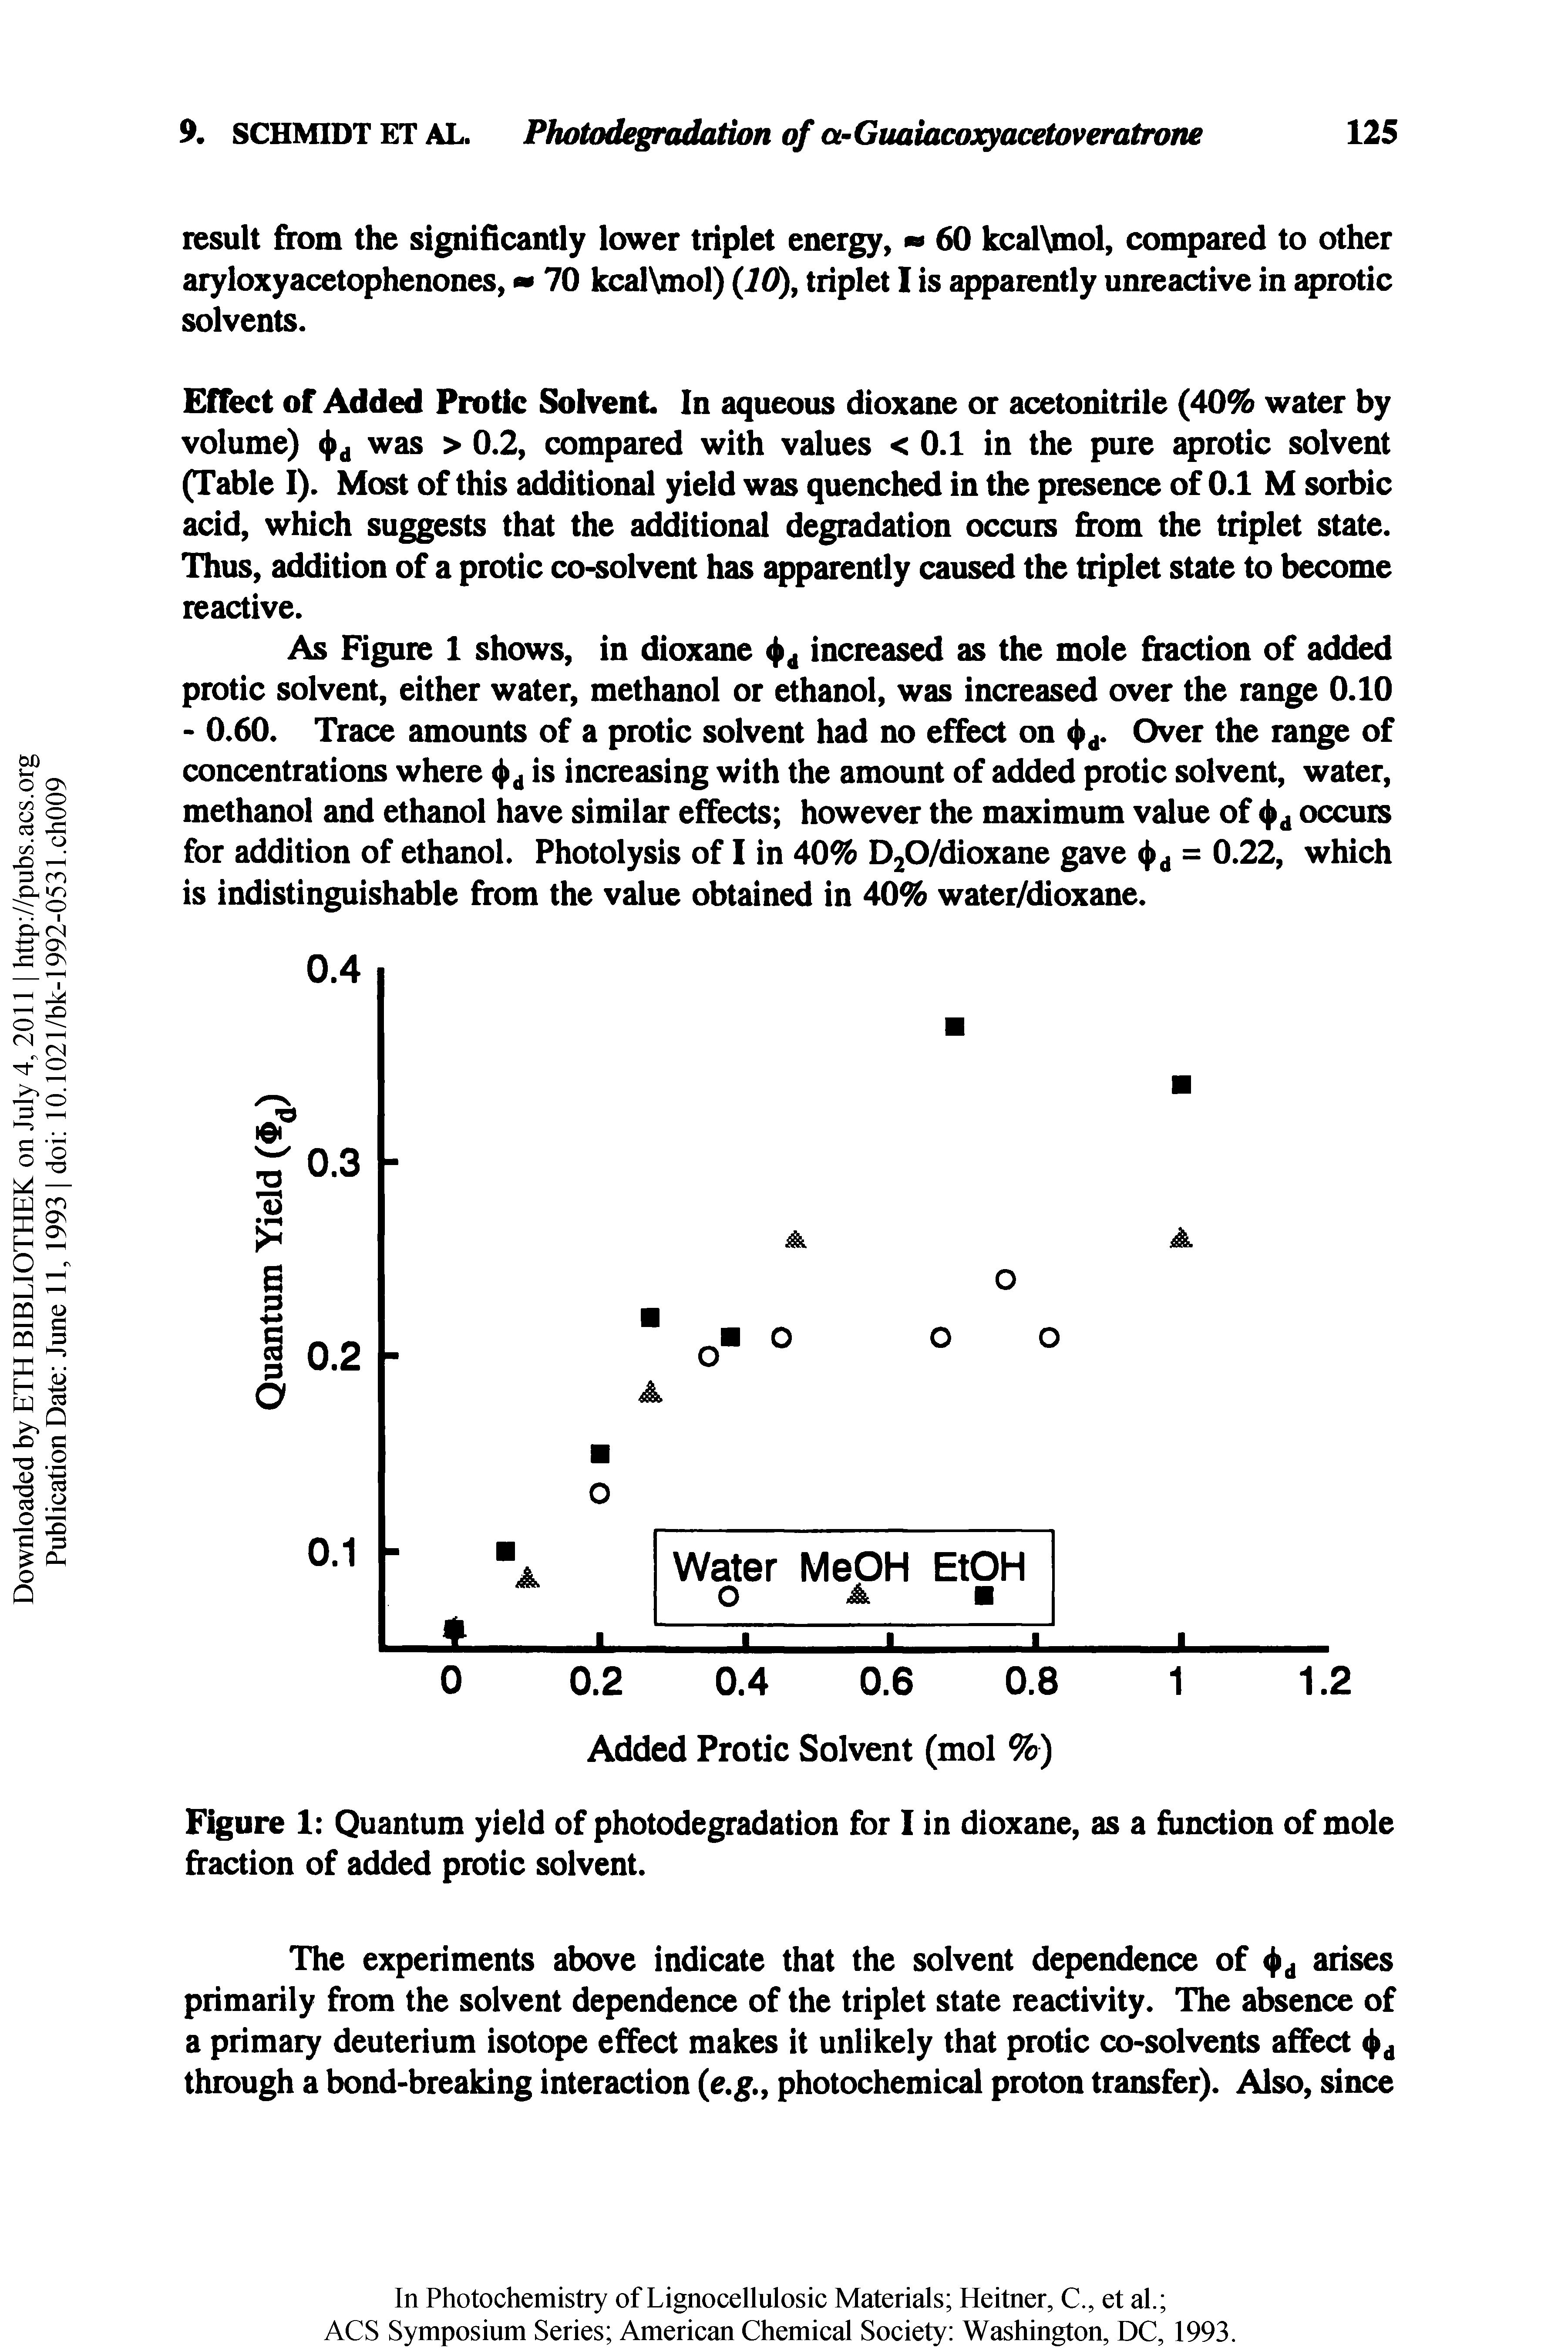 Figure 1 Quantum yield of photodegradation for I in dioxane, as a function of mole fraction of added protic solvent.